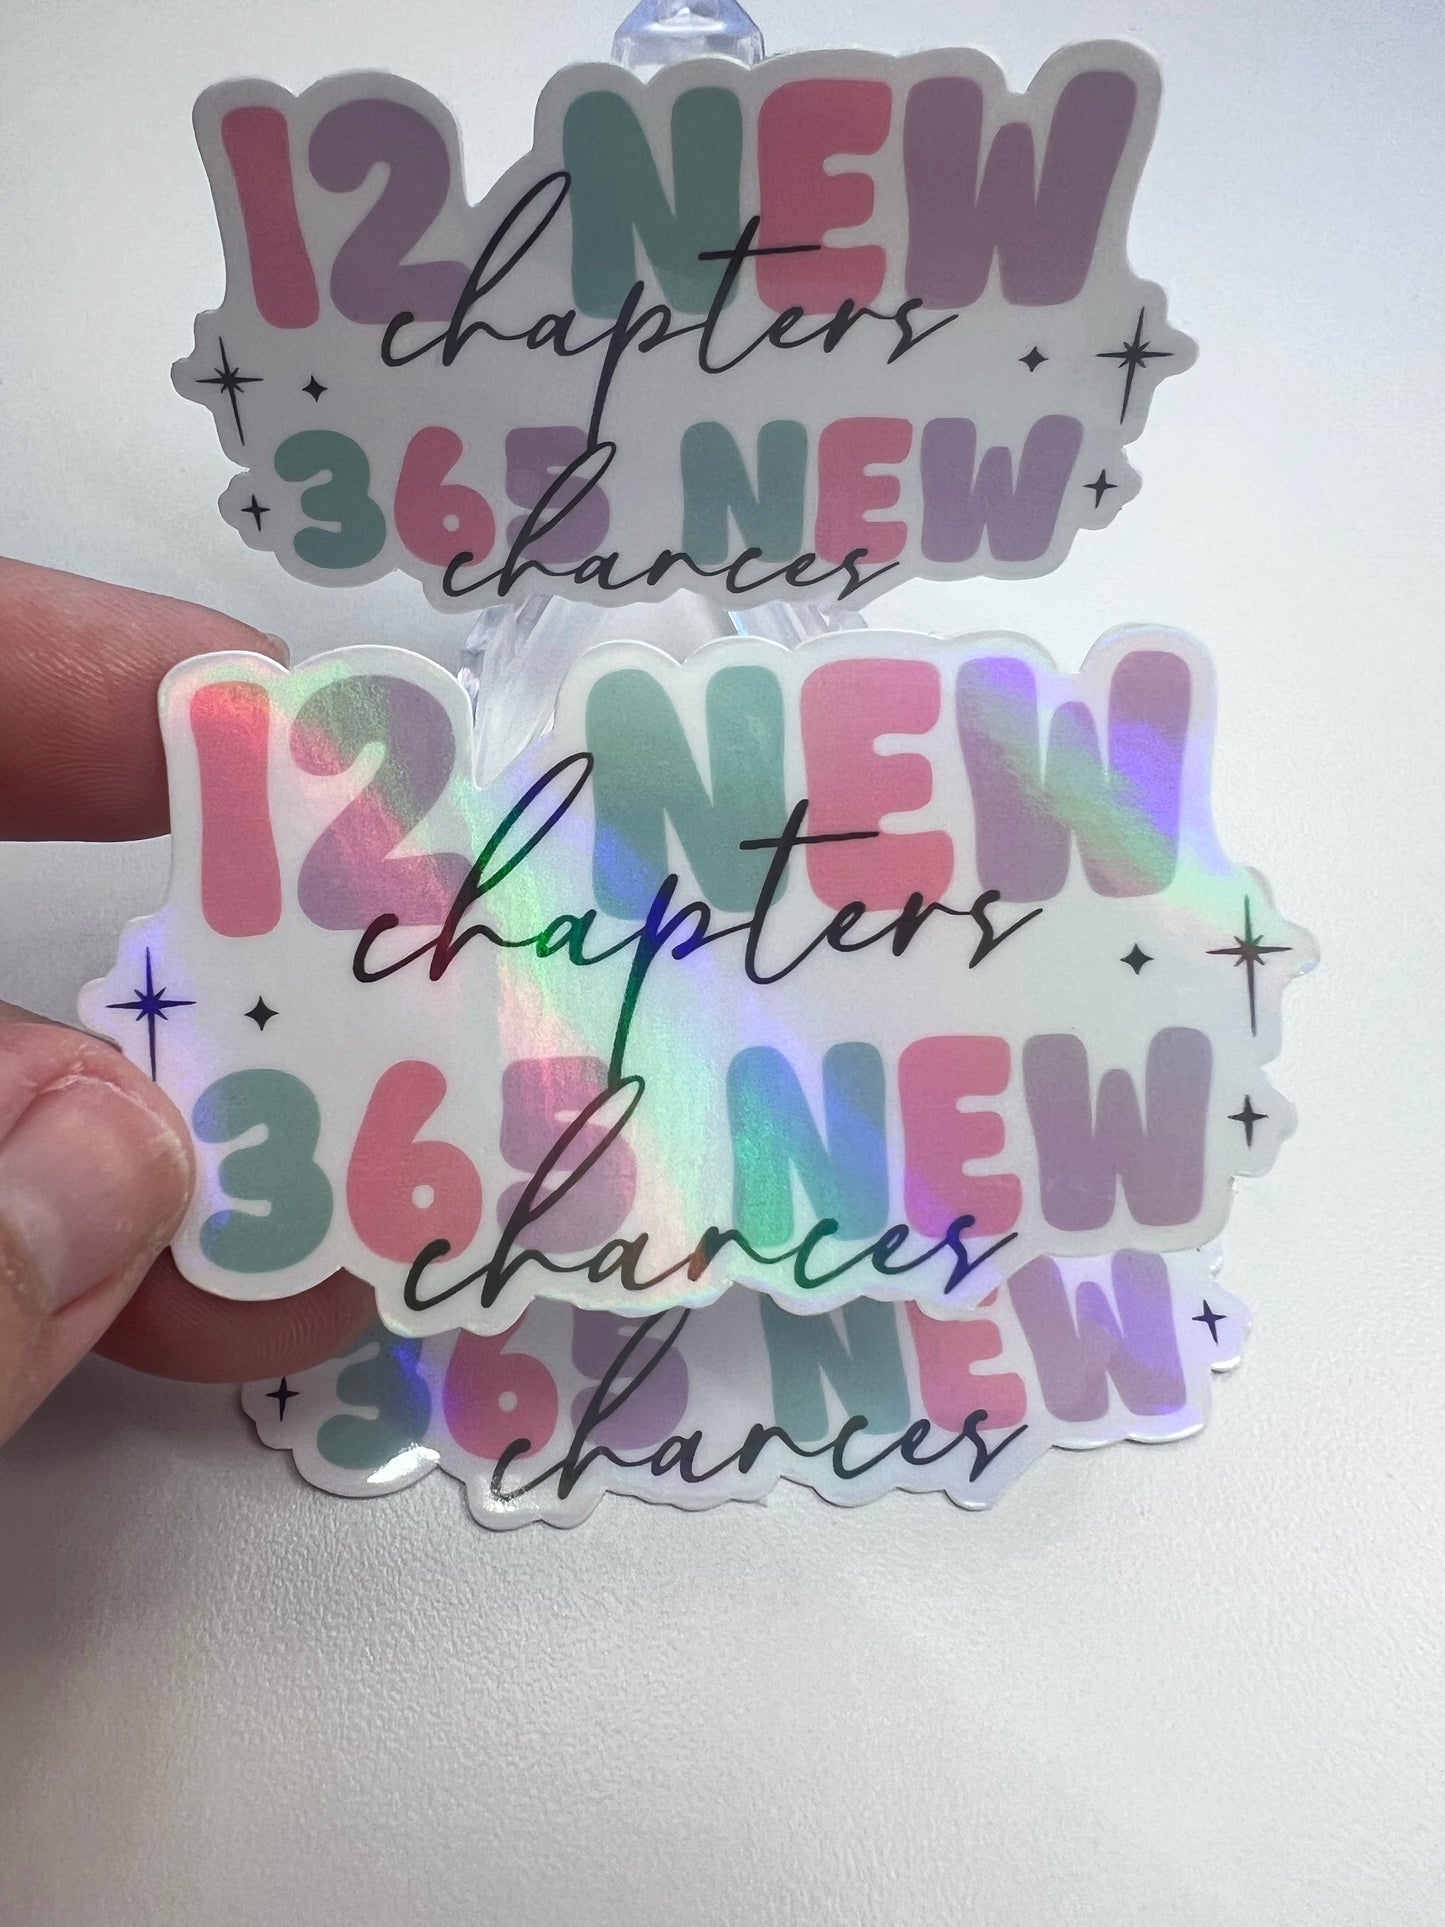 12 New Chapters 365 New Chances  Die Cut Sticker (c 011)